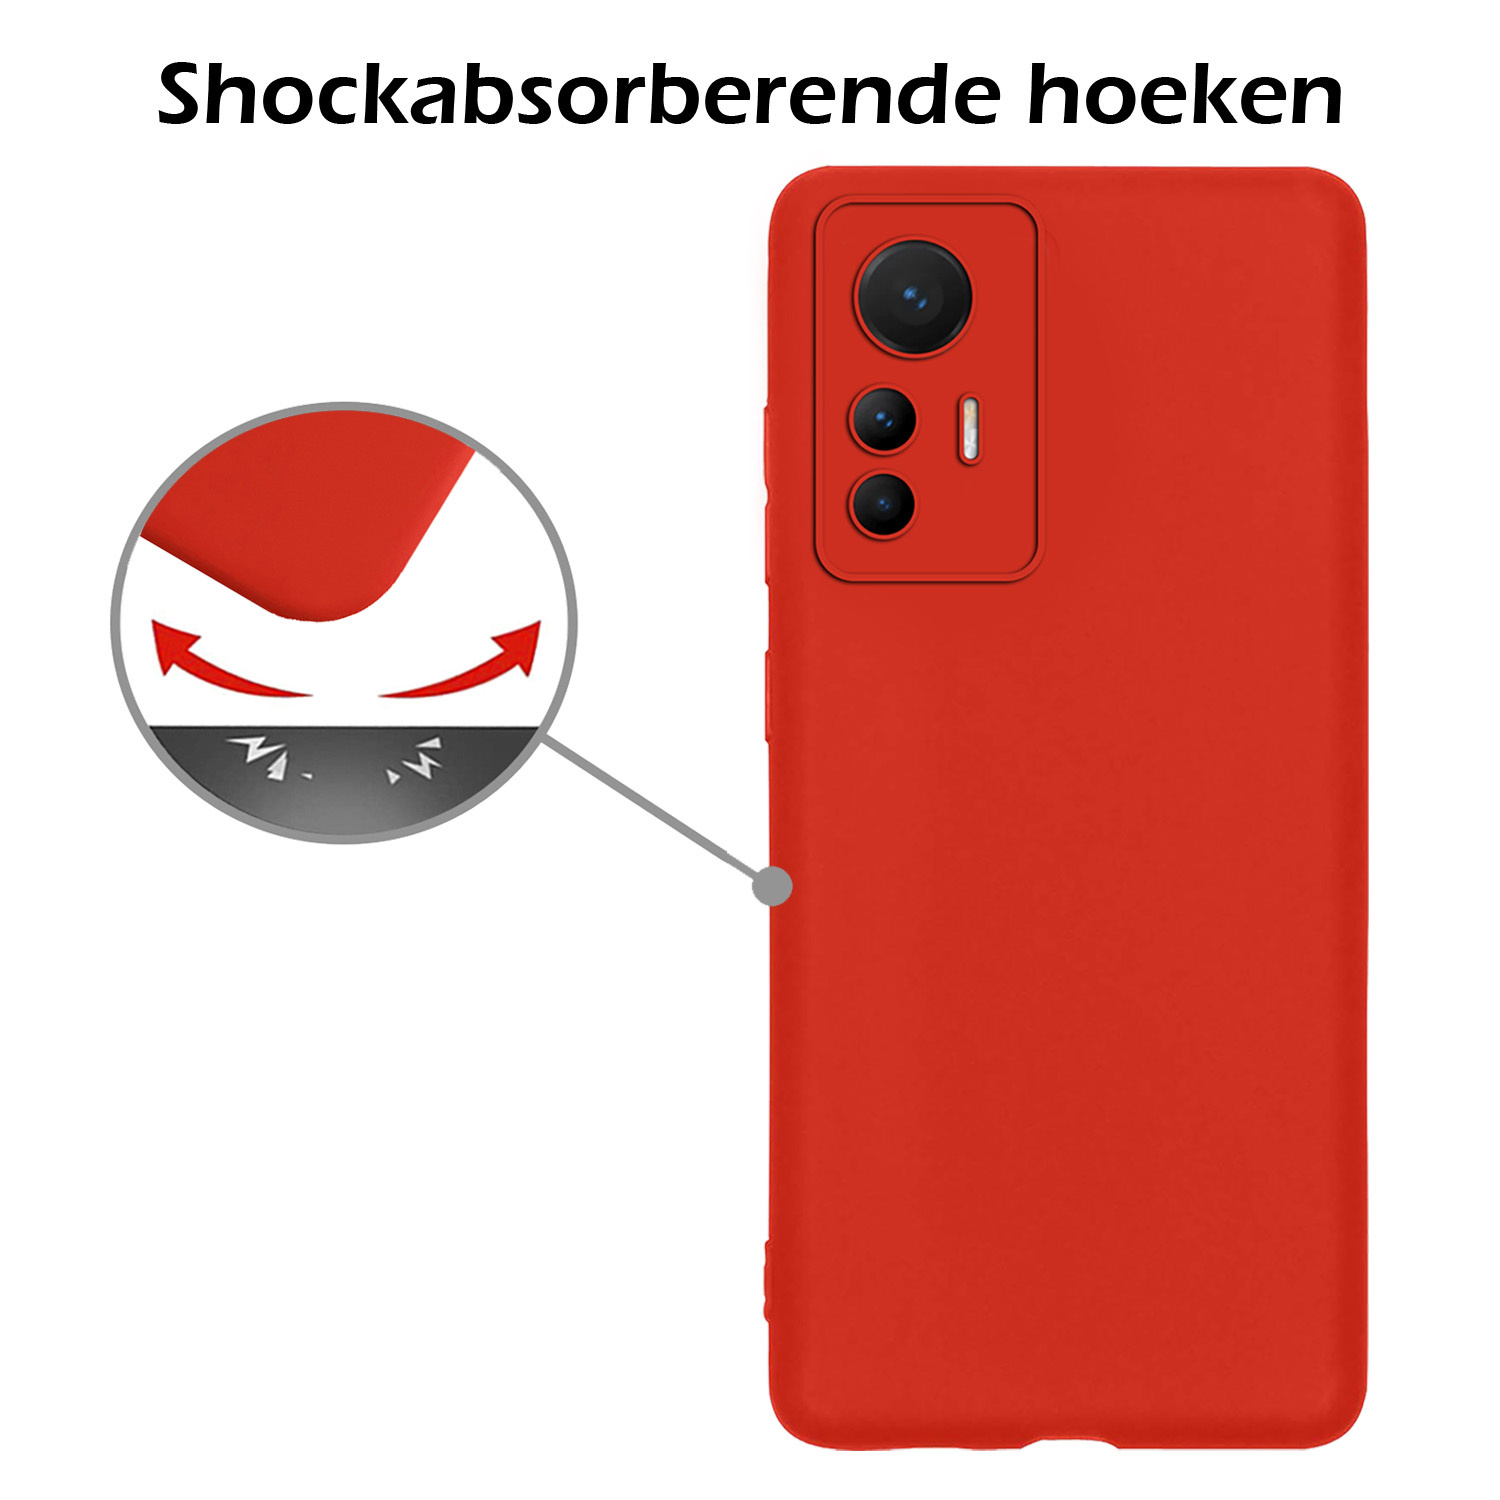 Nomfy Xiaomi 12 Lite Hoesje Siliconen Case Back Cover Met Screenprotector - Xiaomi 12 Lite Hoes Cover Silicone - Rood